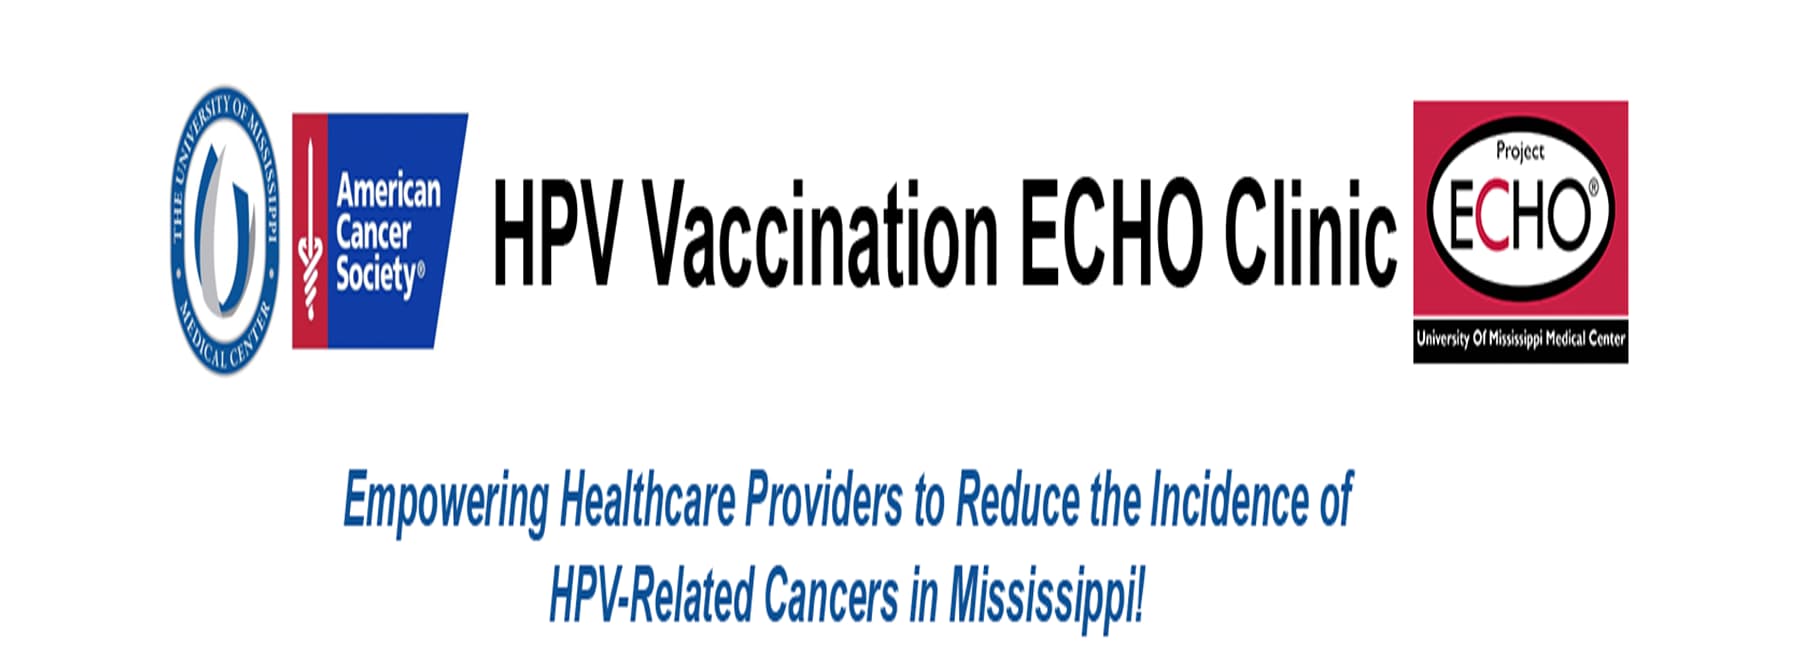 HPV Vaccination ECHO Clinic: Empowering Healthcare Providers to Reduce the Incidence of HPV-related Cancers in Mississippi. UMMC logo. American Cancer Society Logo. Project ECHO logo.